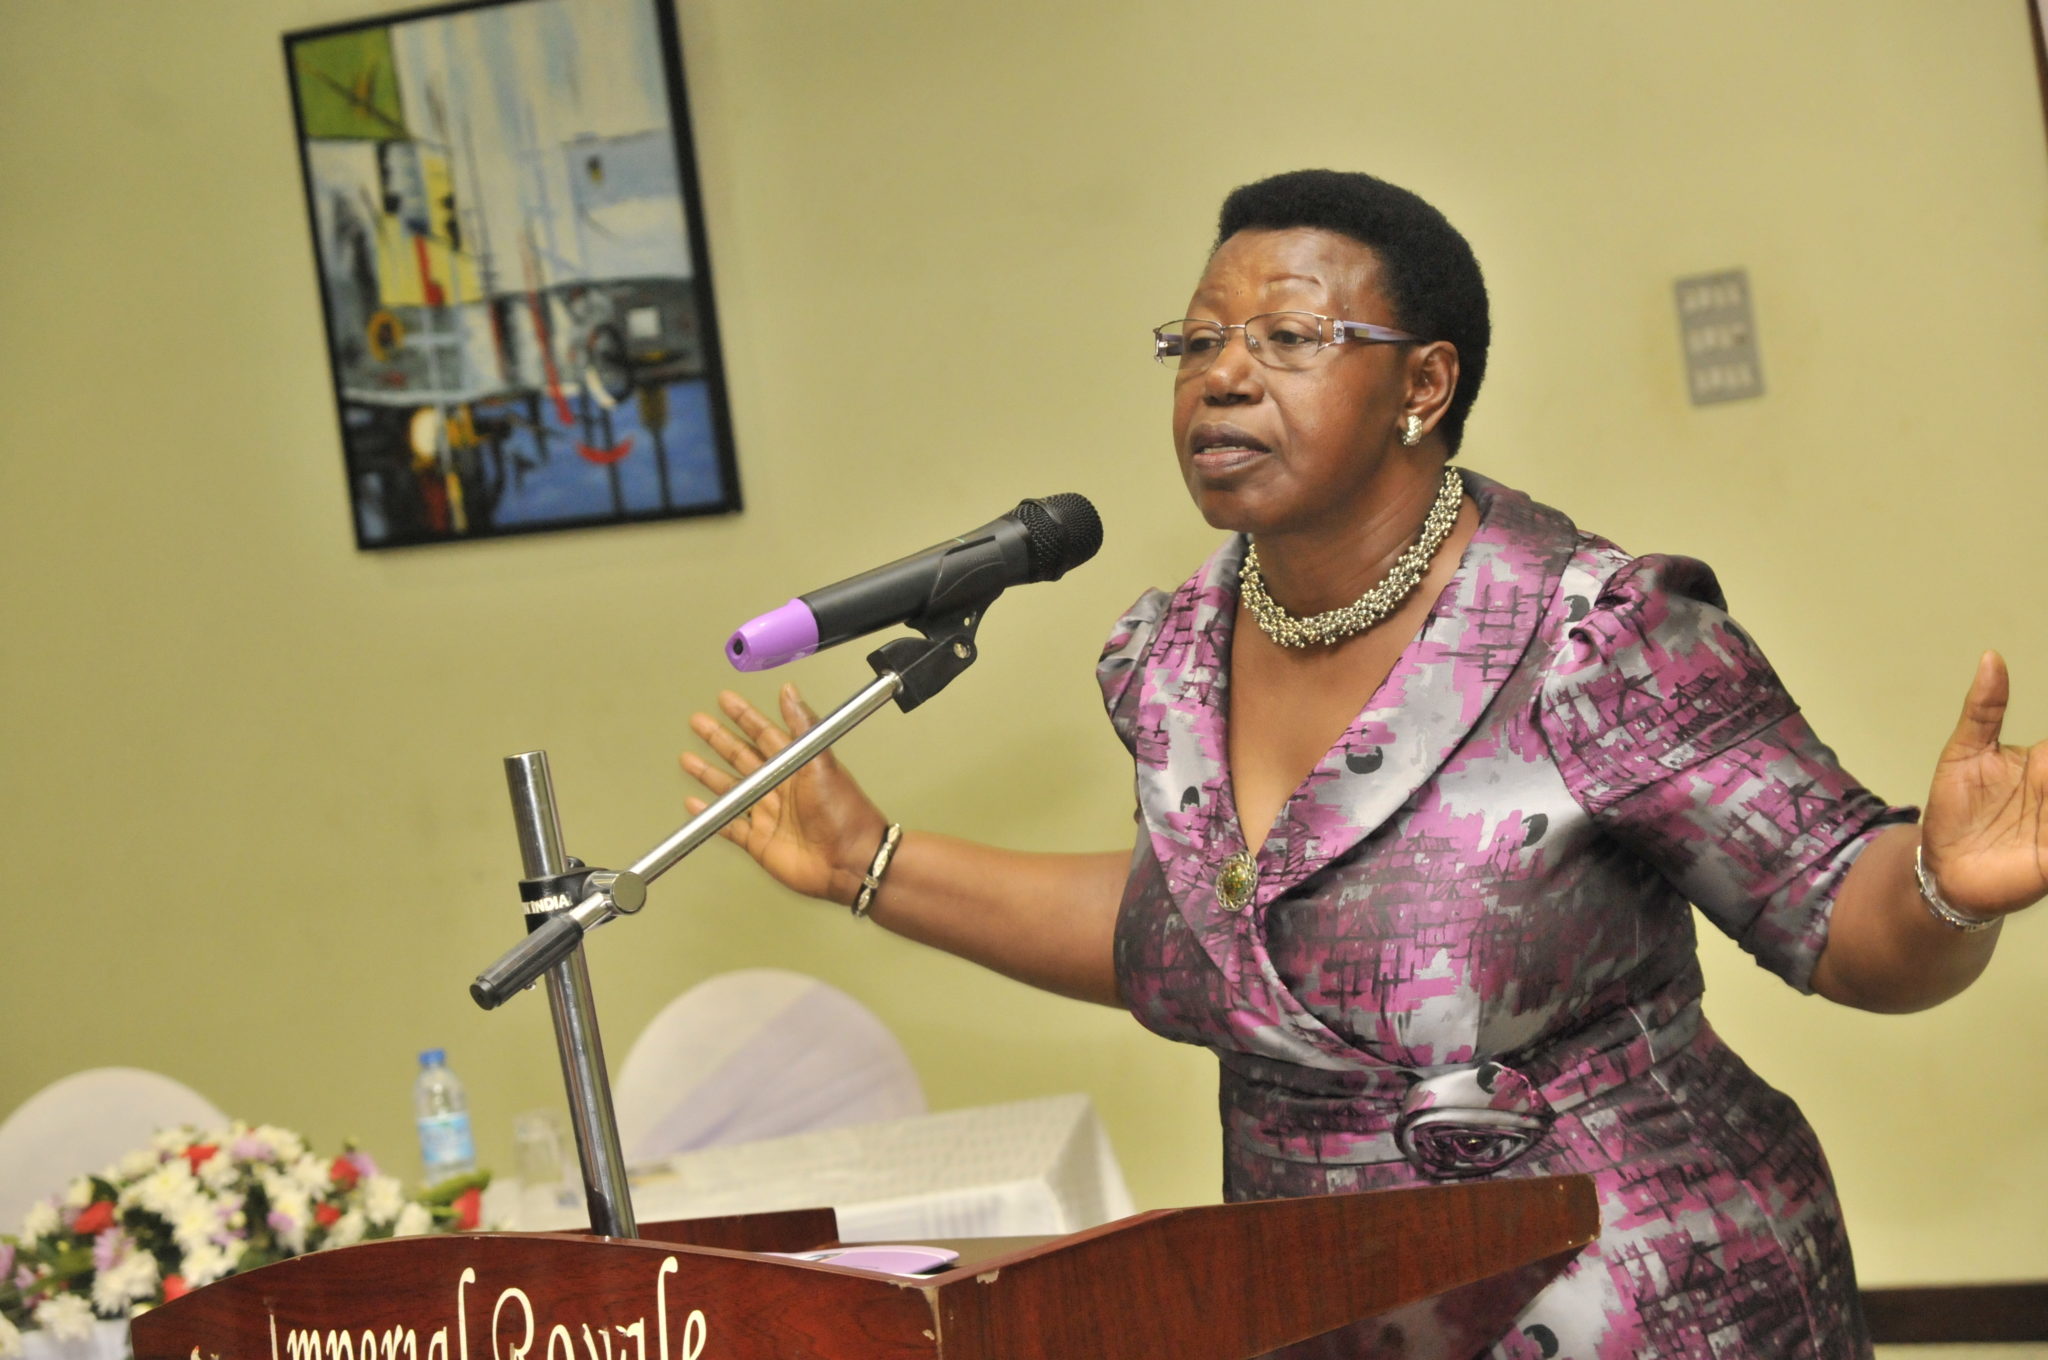 WHO IS KIBUULE? Woman and human rights activist Miria Matembe seems to be asking.